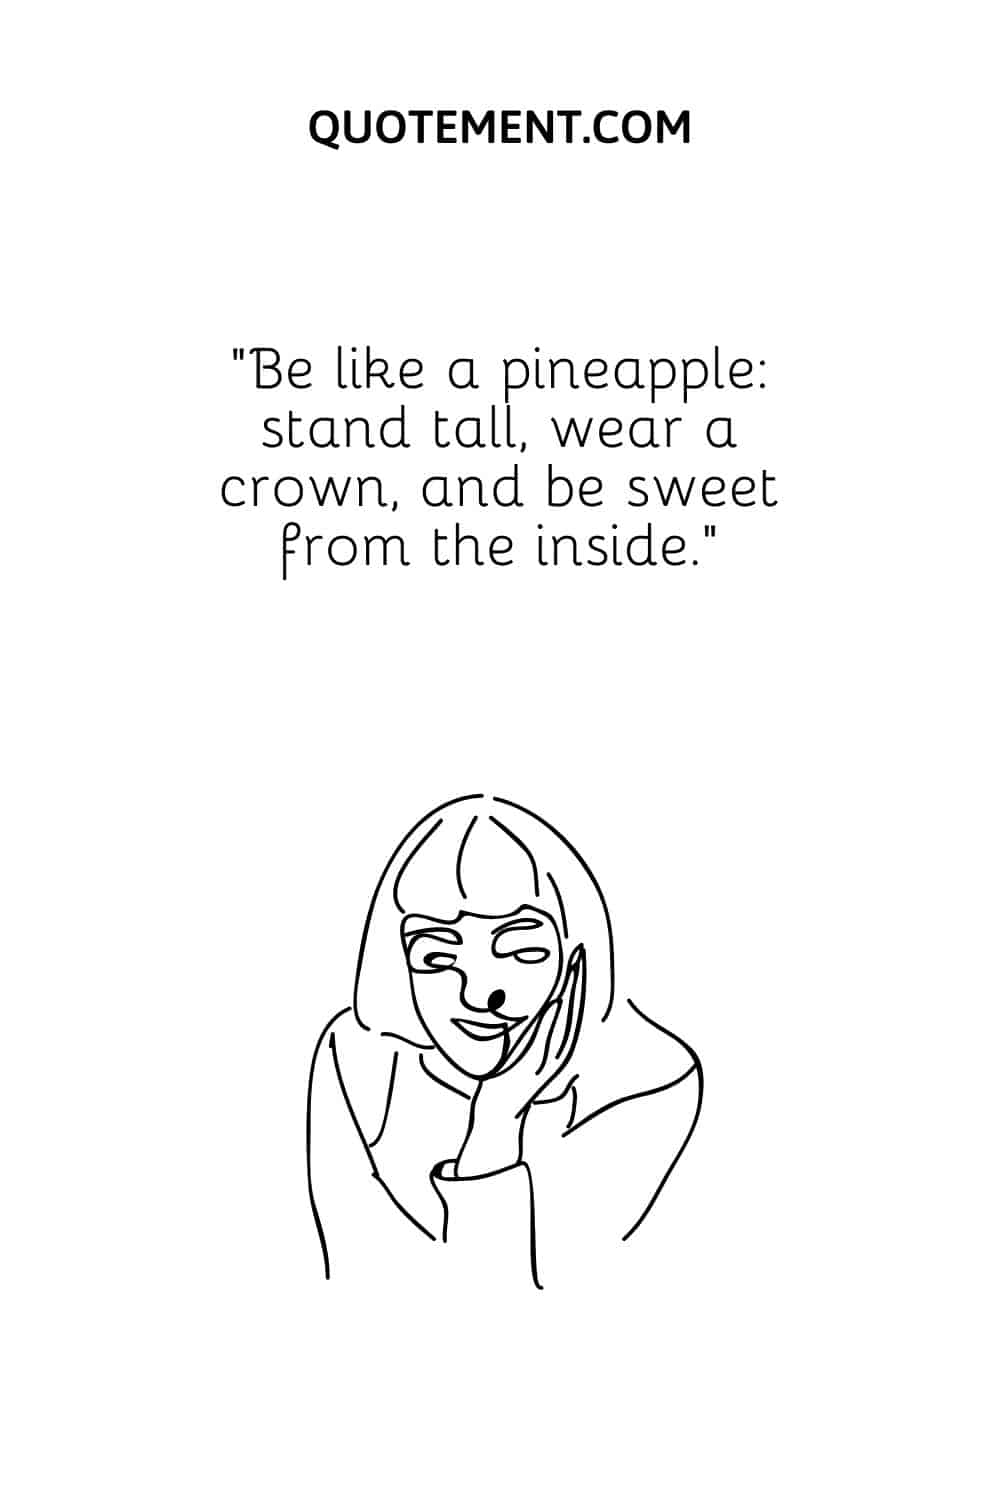 Be like a pineapple stand tall, wear a crown, and be sweet from the inside